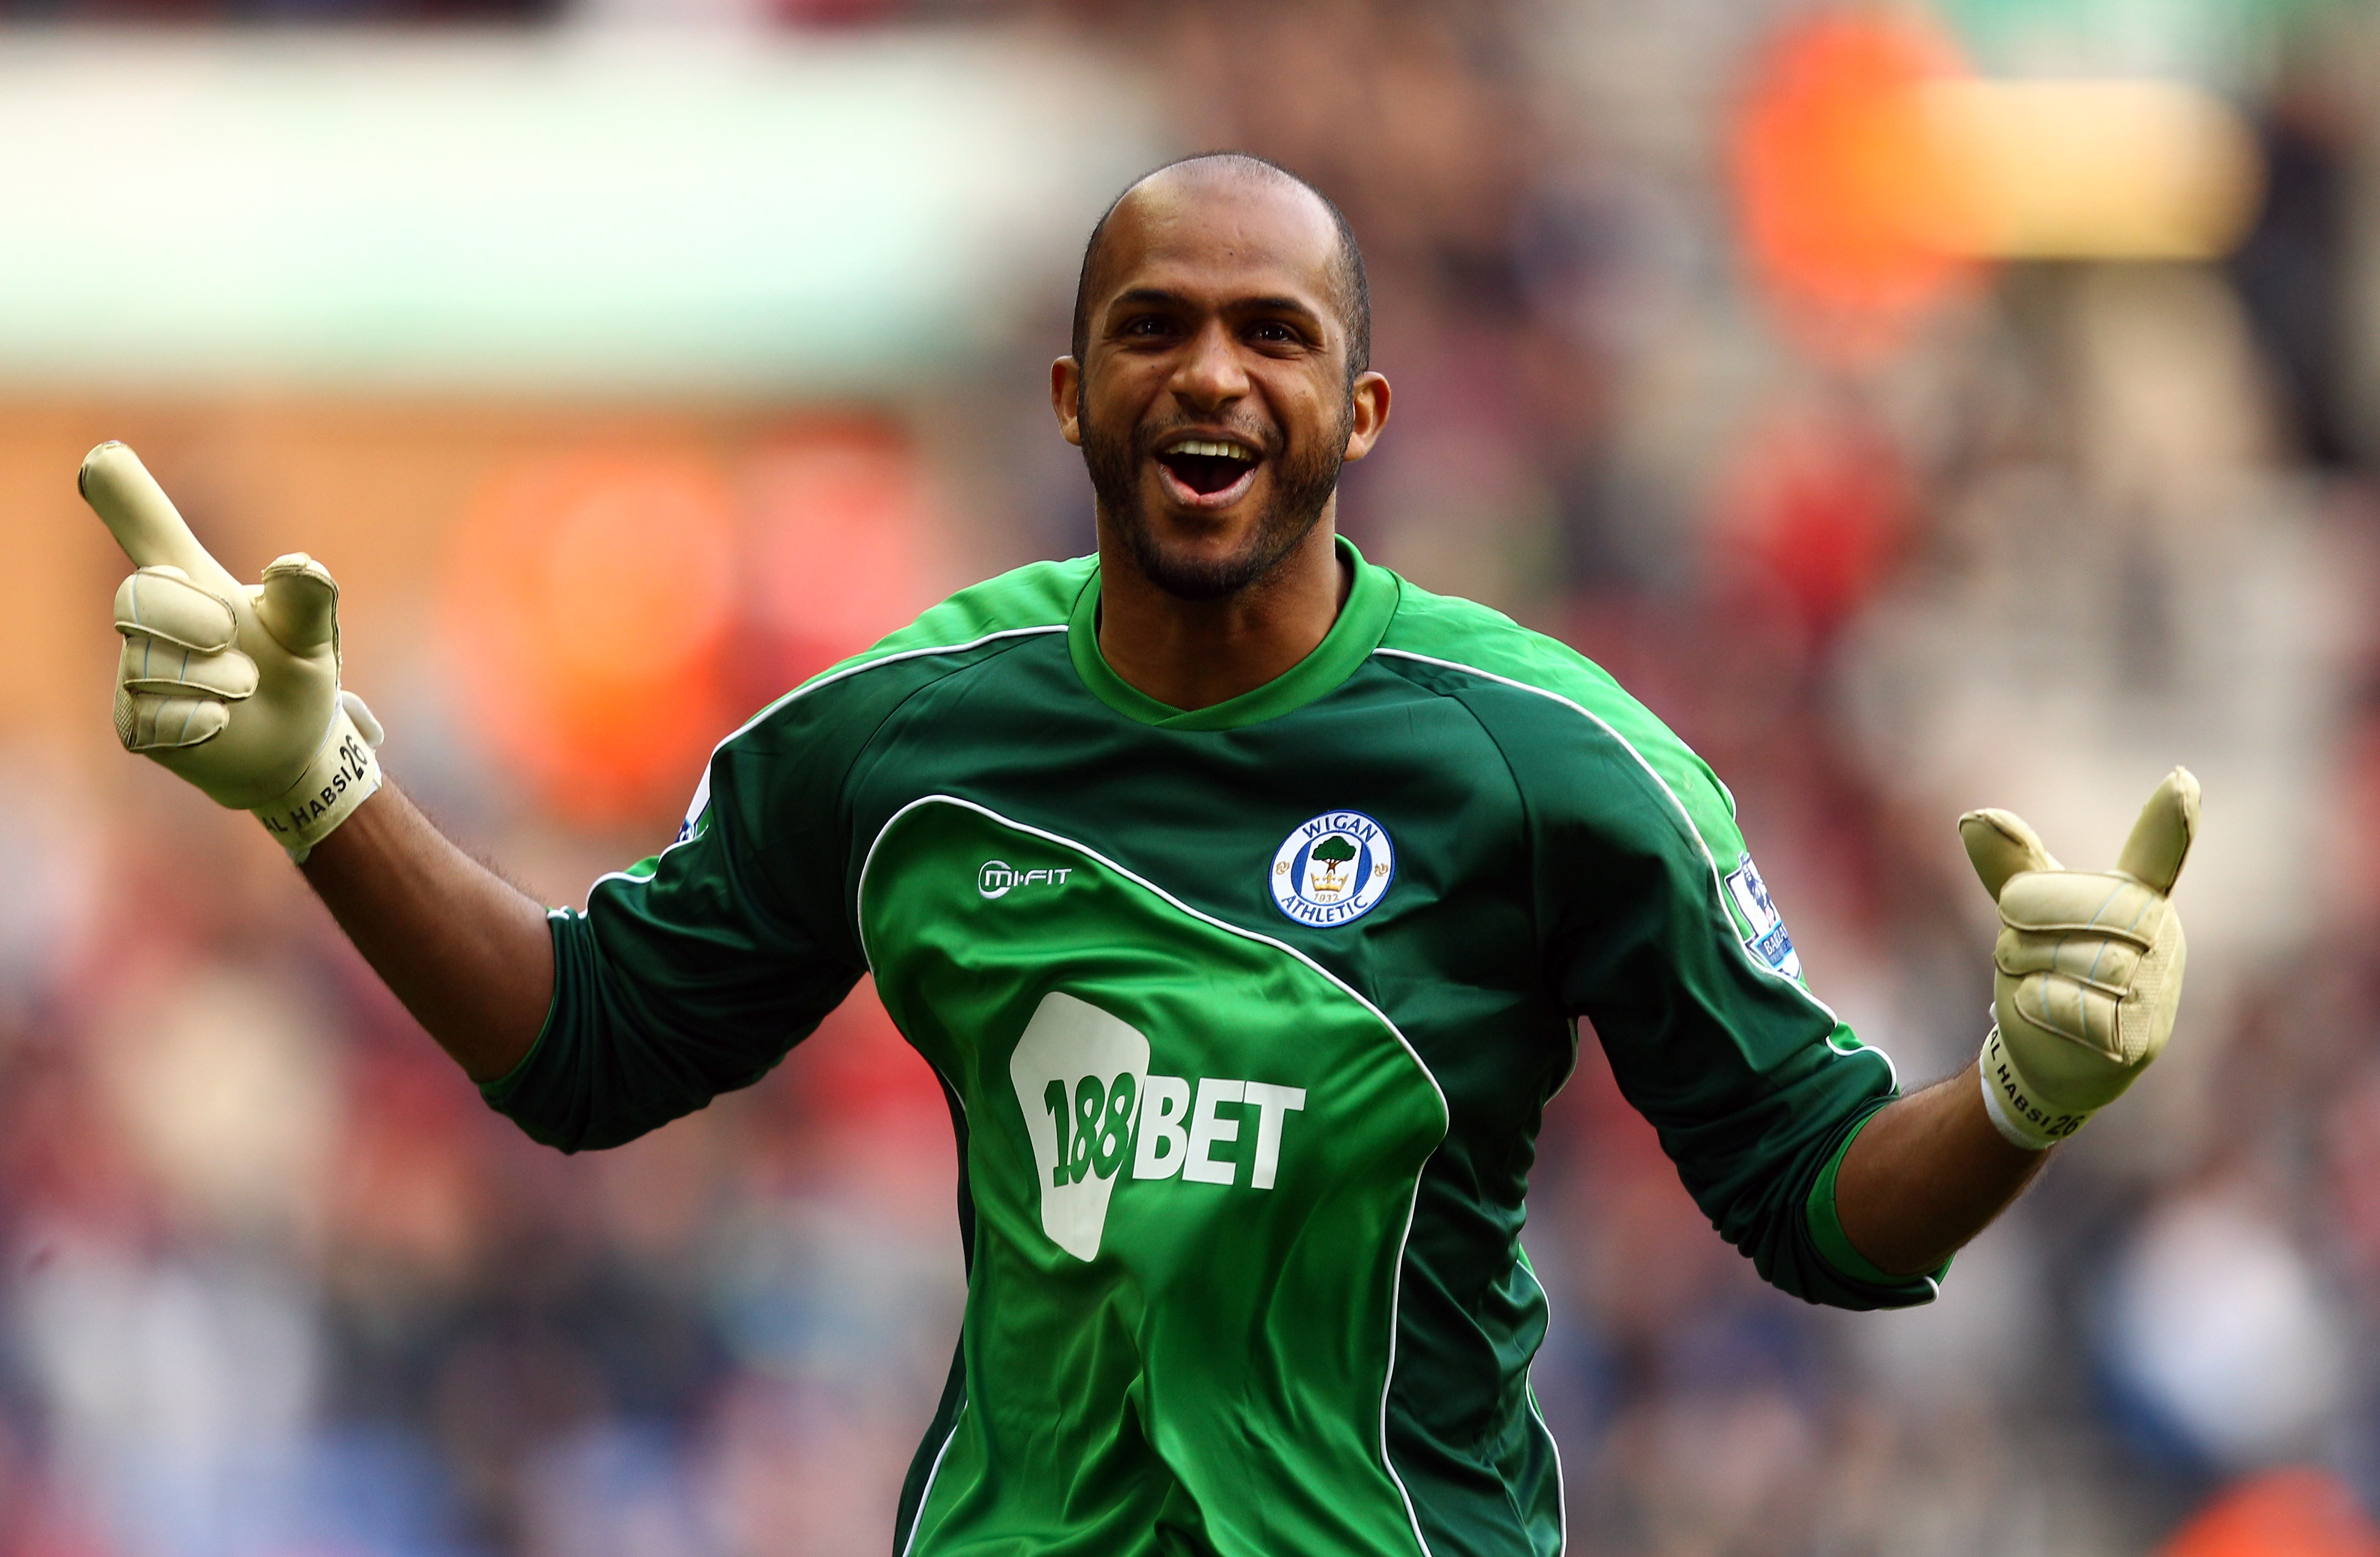 WIGAN, ENGLAND - MARCH 19:  Wigan goal keeper Ali Al Habsi celebrates the winning goal during the Barclays Premier League match between Wigan Athletic and Birmingham City at the DW Stadium on March 19, 2011 in Wigan, England.  (Photo by Richard Heathcote/